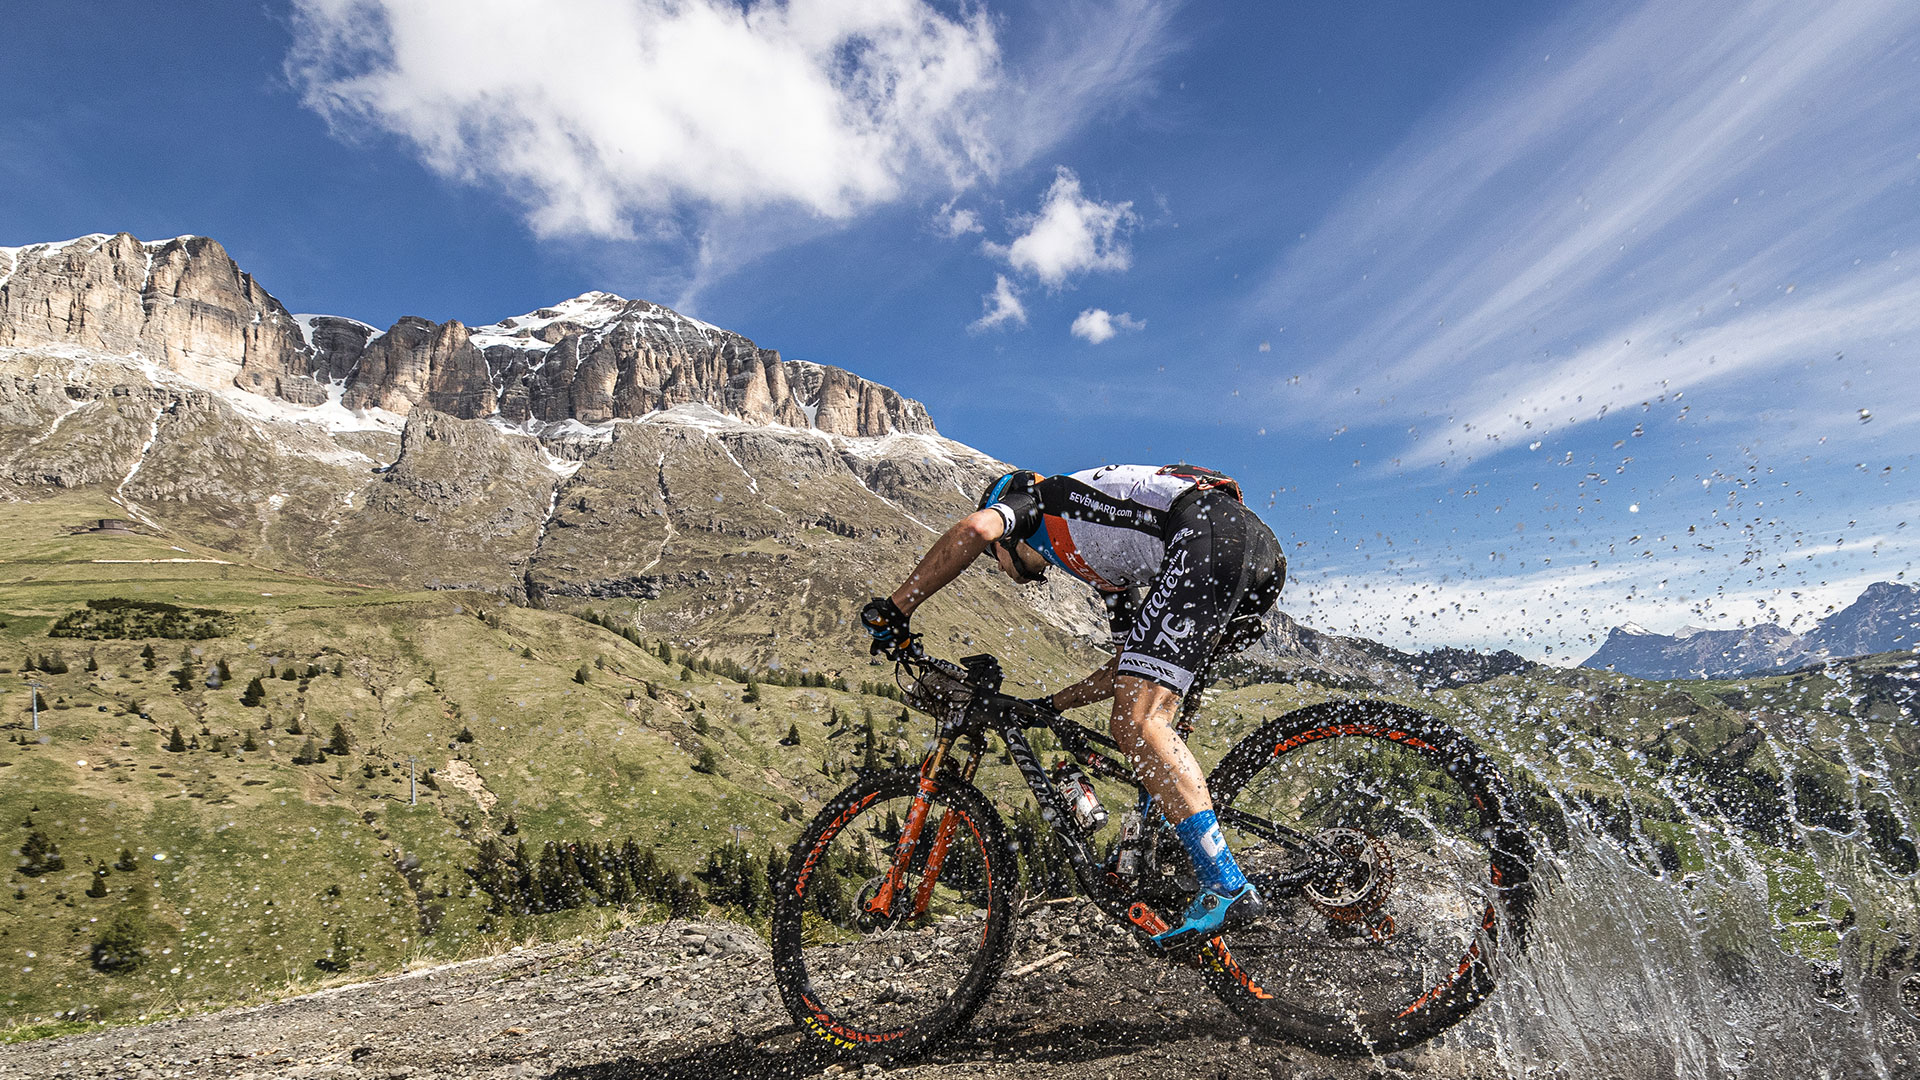 The BMW HERO Südtirol Dolomites. The Race of Heroes on one of the world's most stunning trails